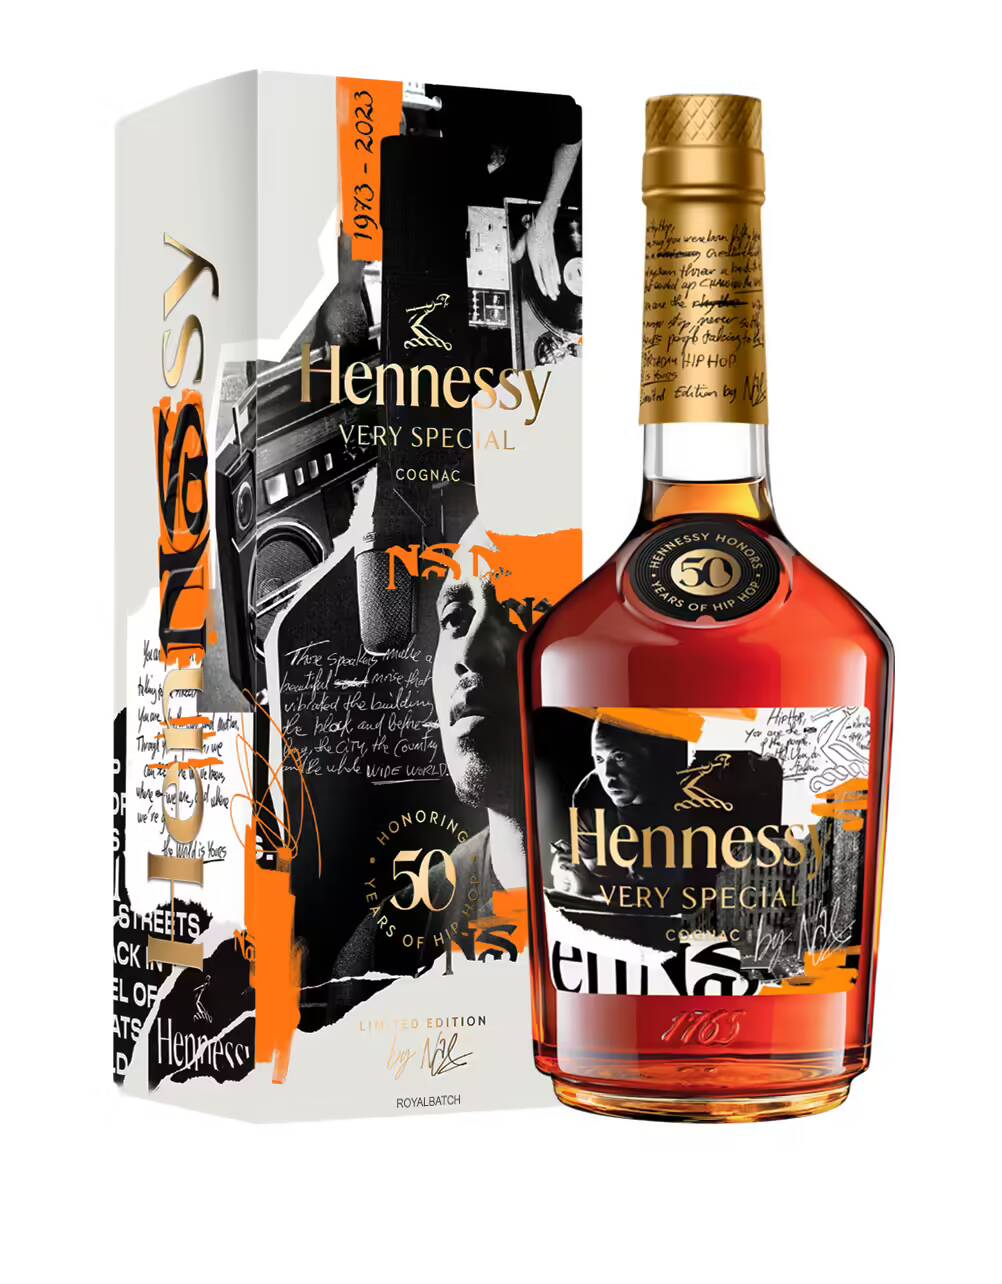 Hennessy VS Hip Hop 50th Anniversary Limited Edition by Nas